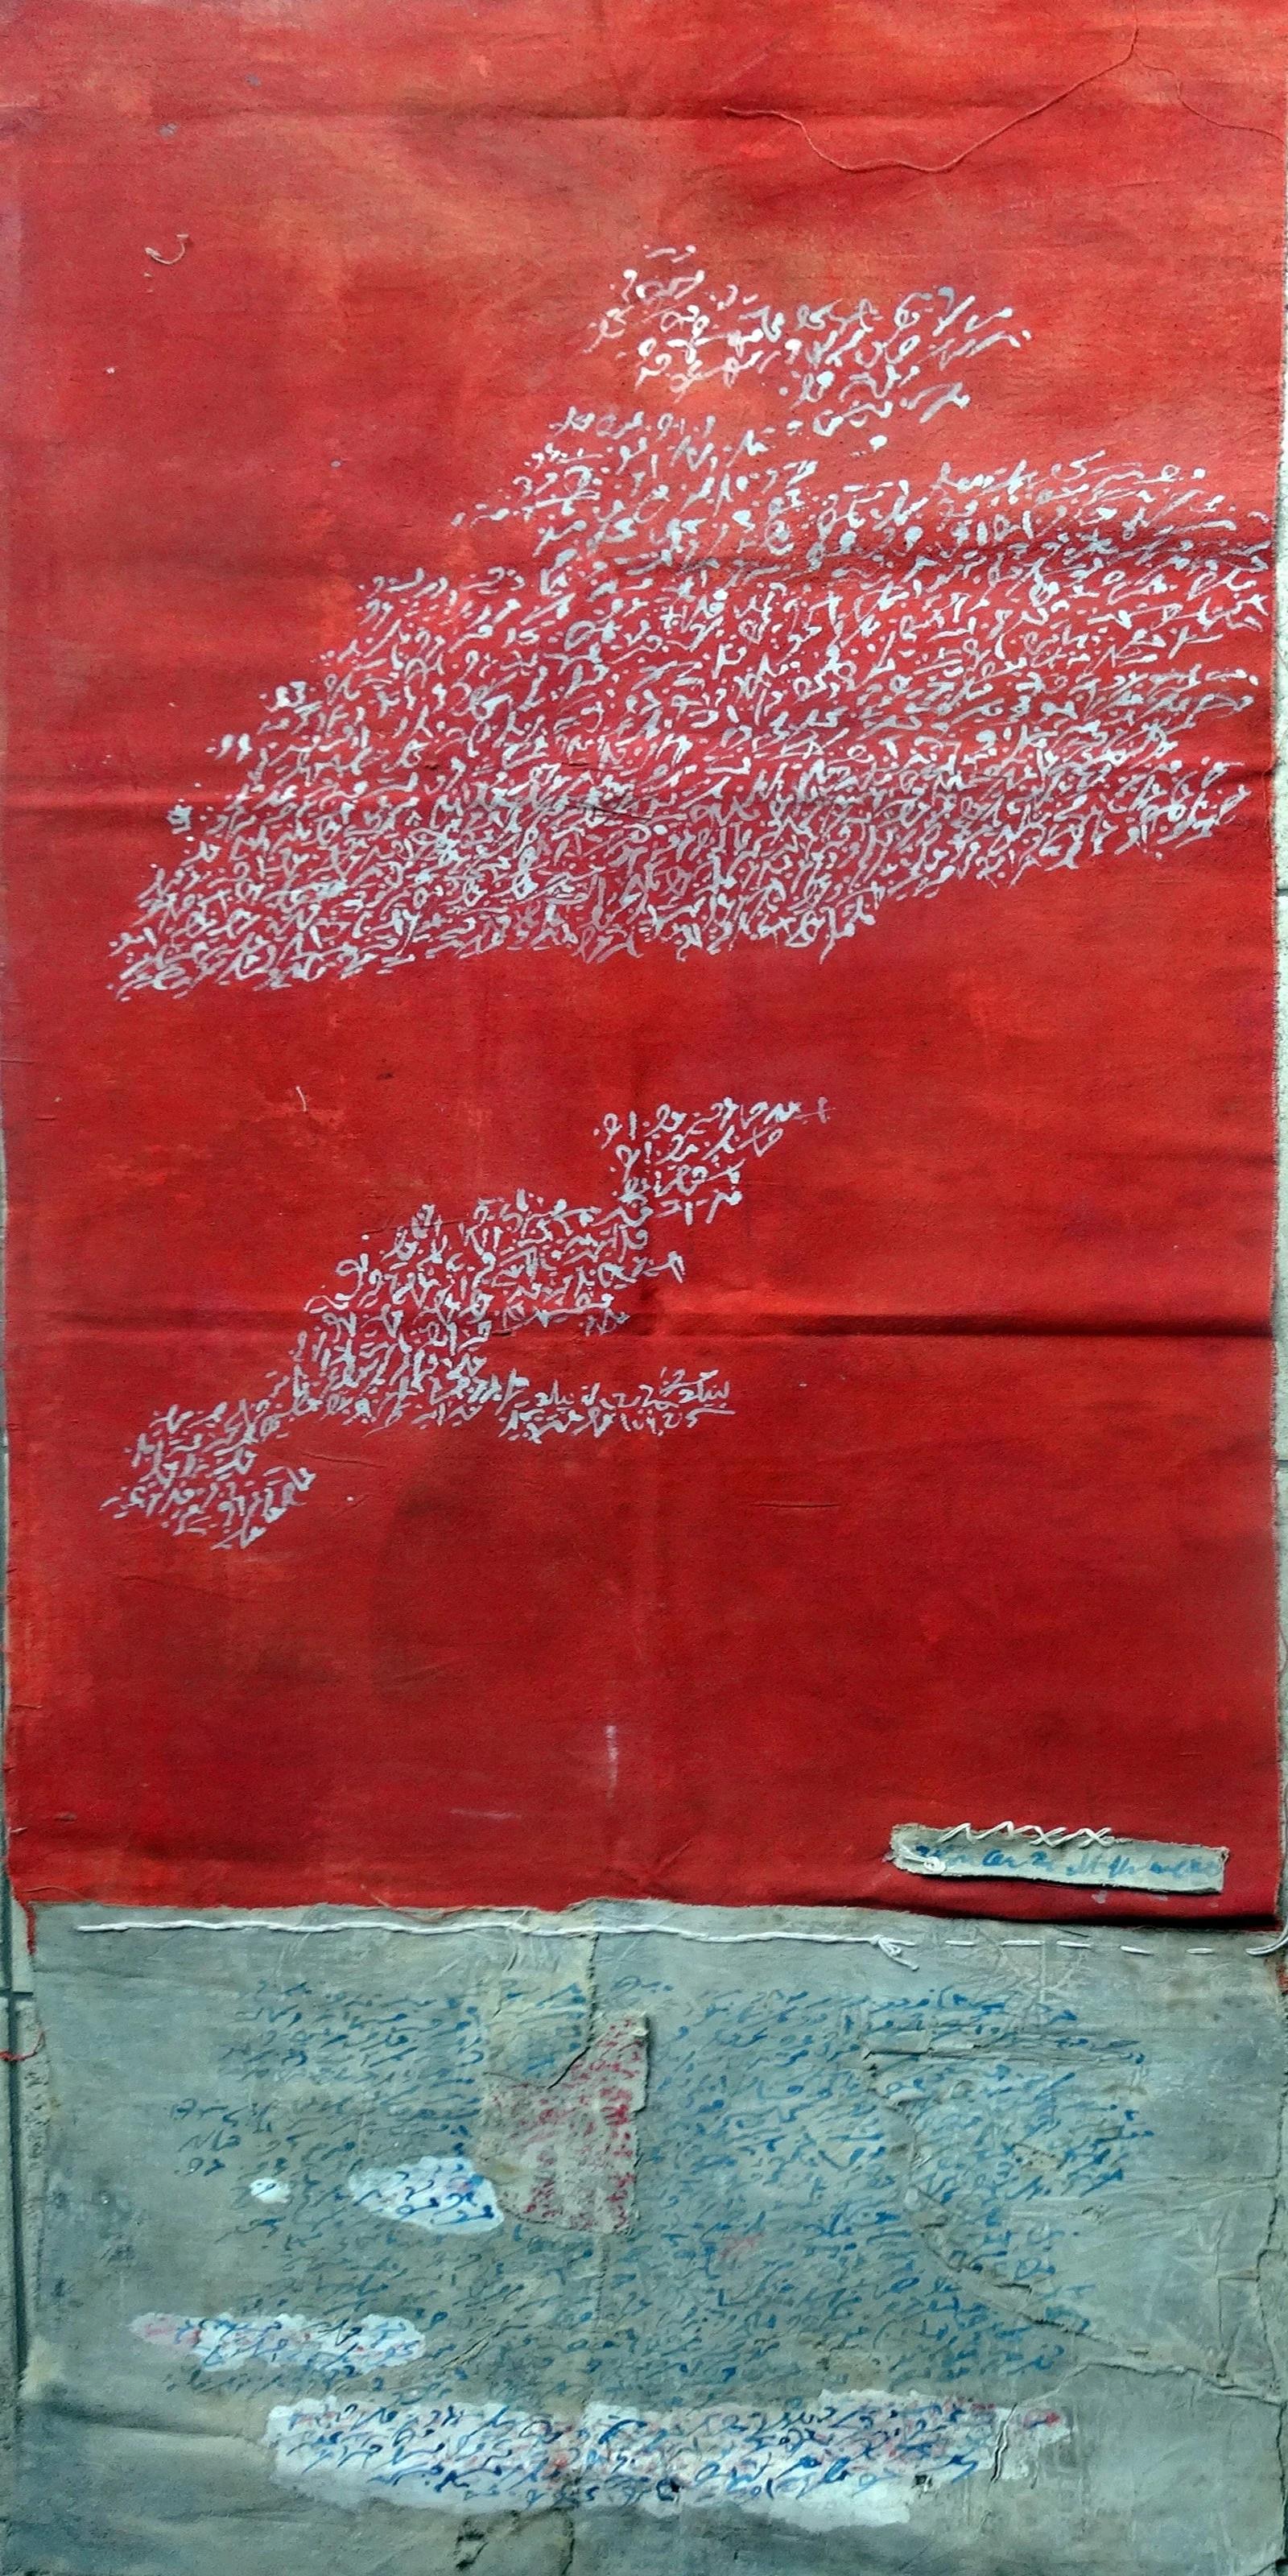 "Abstract Script" Ink on Fabric Painting 55" x 20" inch by Mohamed Monaiseer